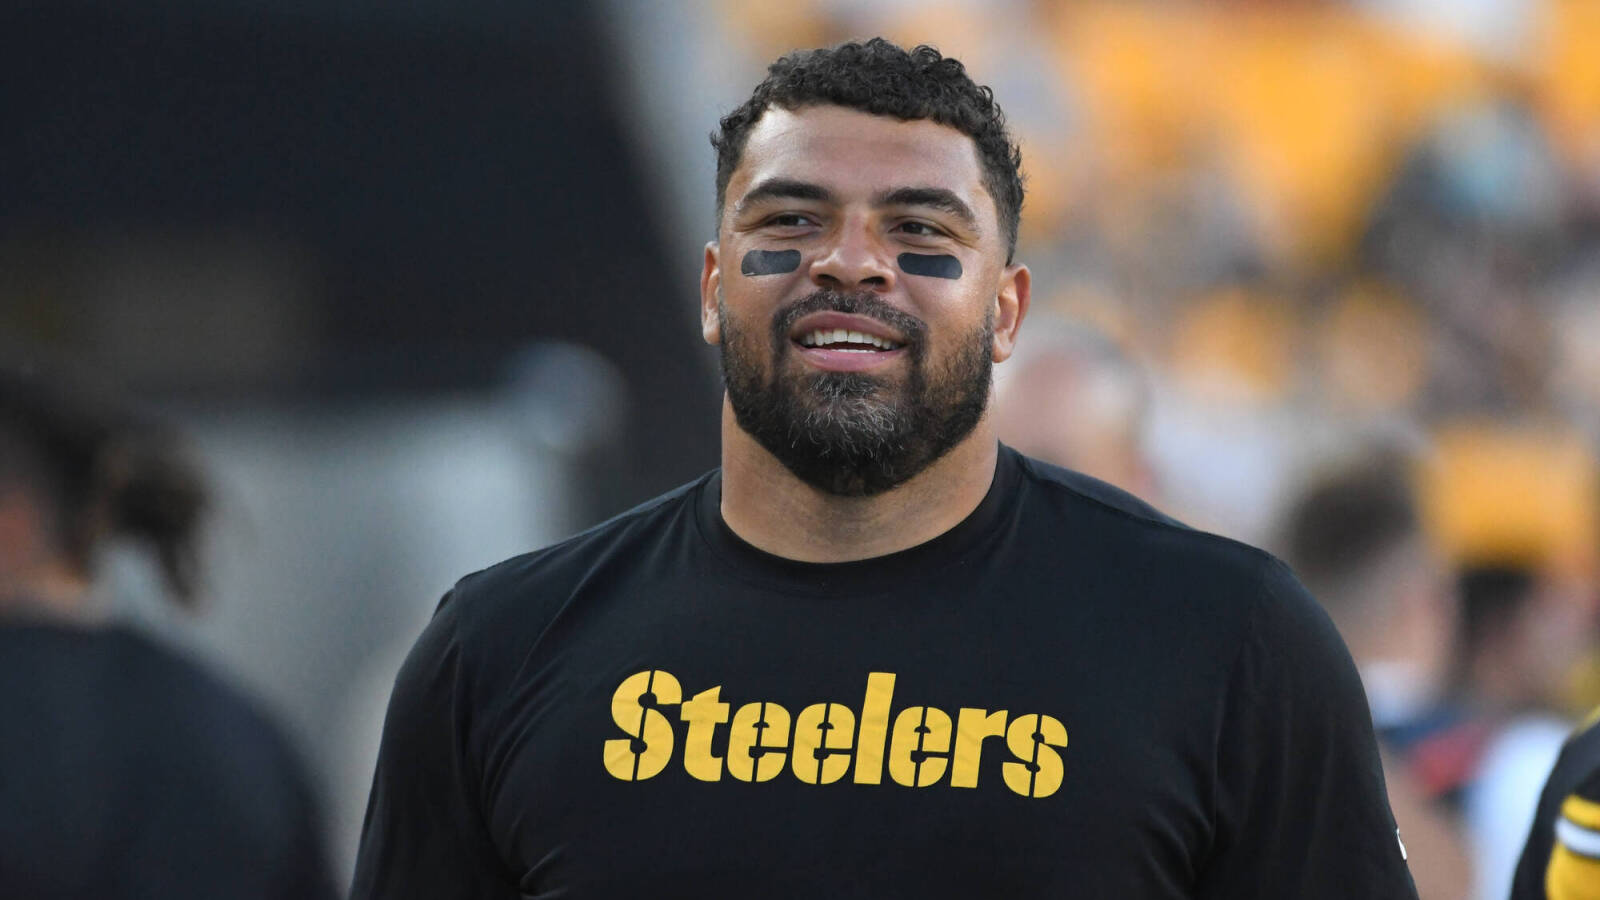 Steelers' Cameron Heyward comments on controversial Justin Fields idea